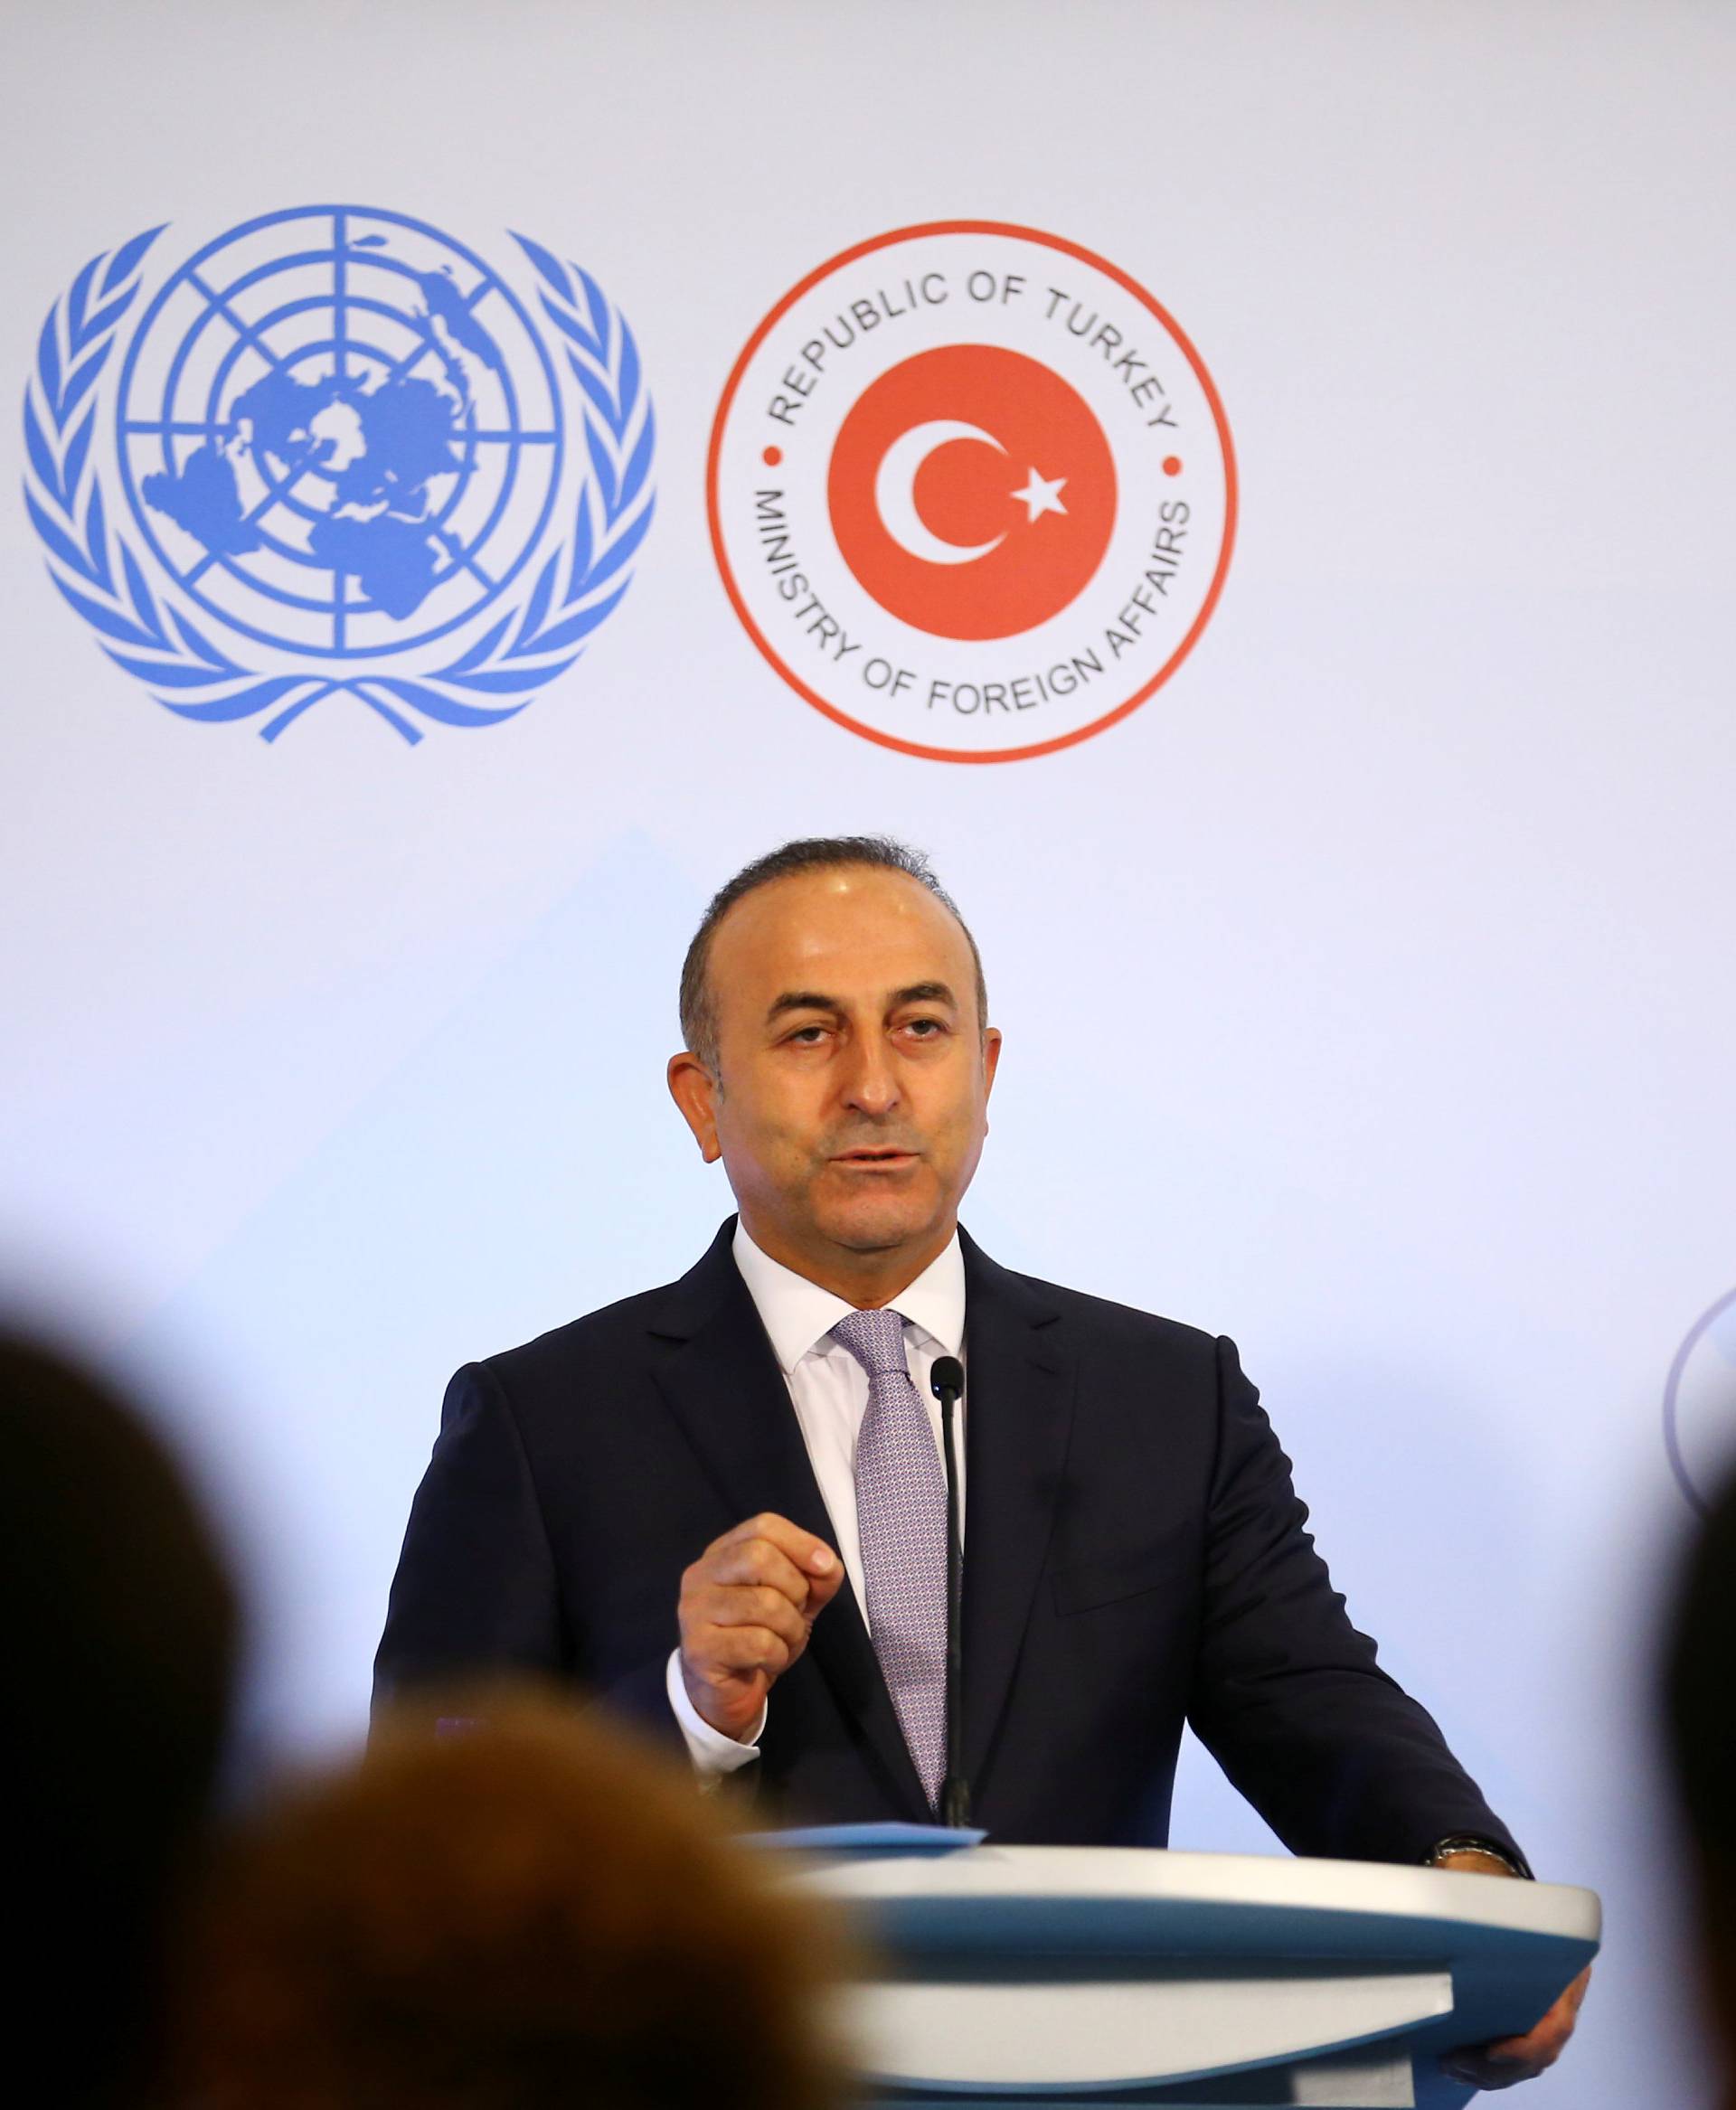 Turkey's Foreign Minister Cavusoglu speaks during a news conference at a UN summit in Antalya